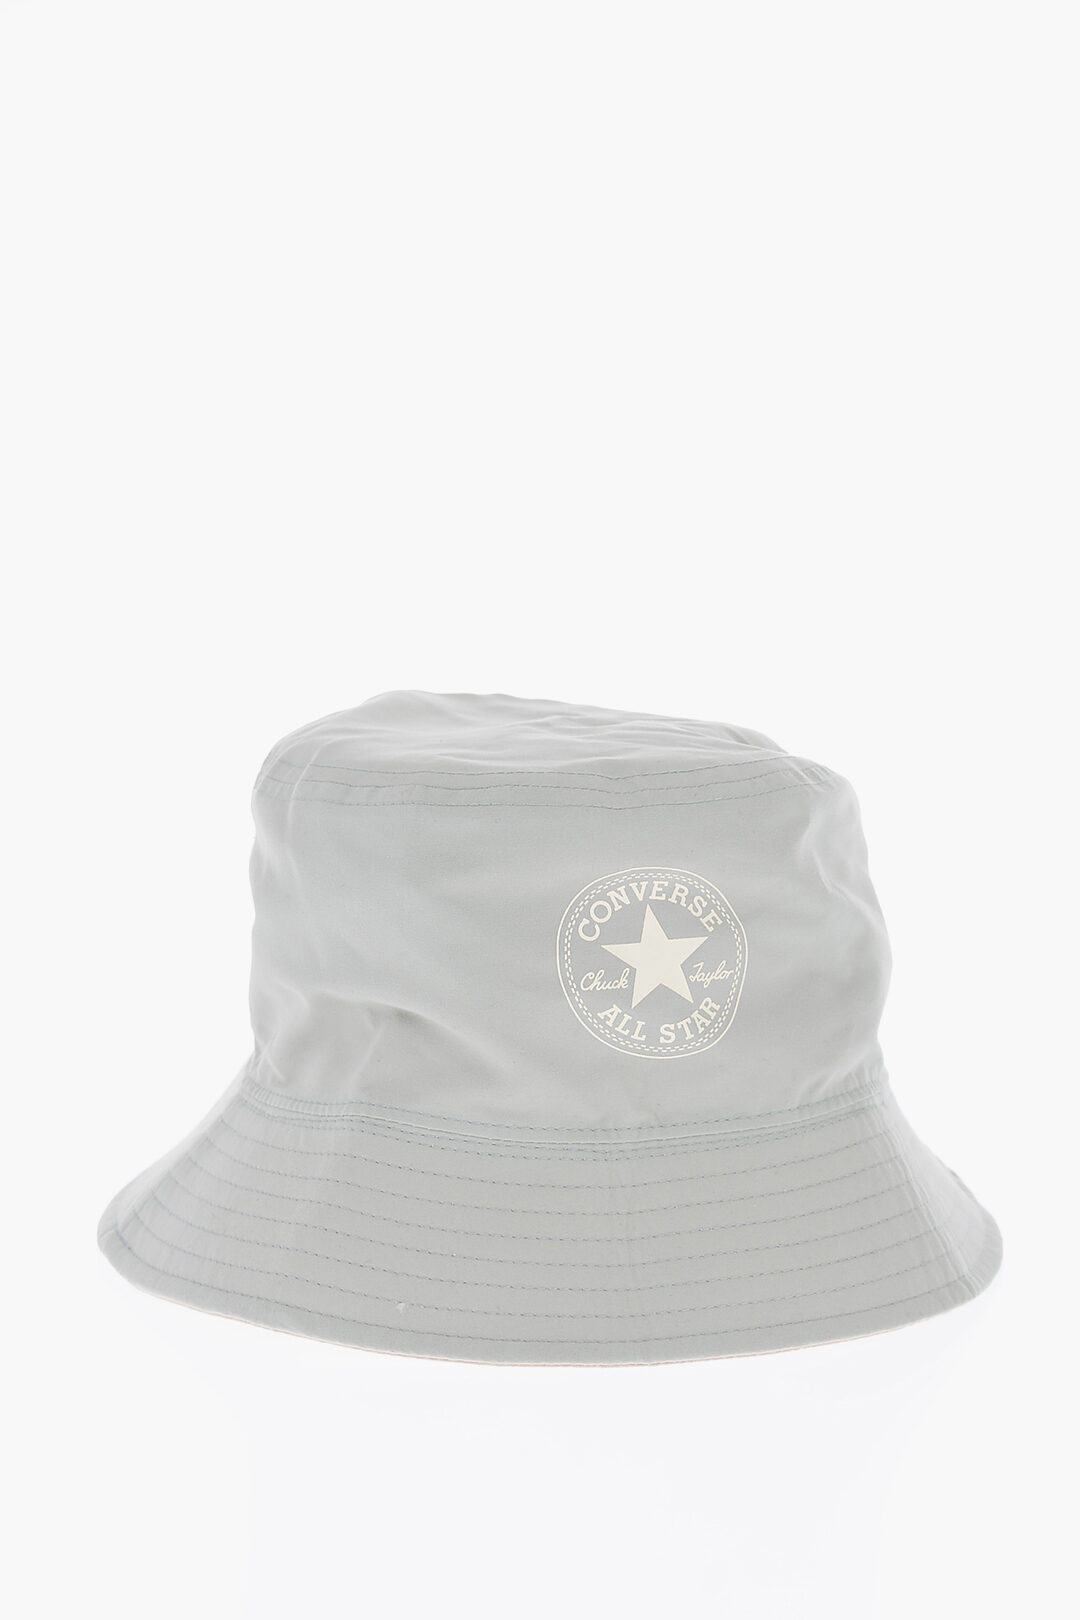 Converse ALL-STAR CHUCK TAYLOR Two-Tone Bucket Hat men women Outlet